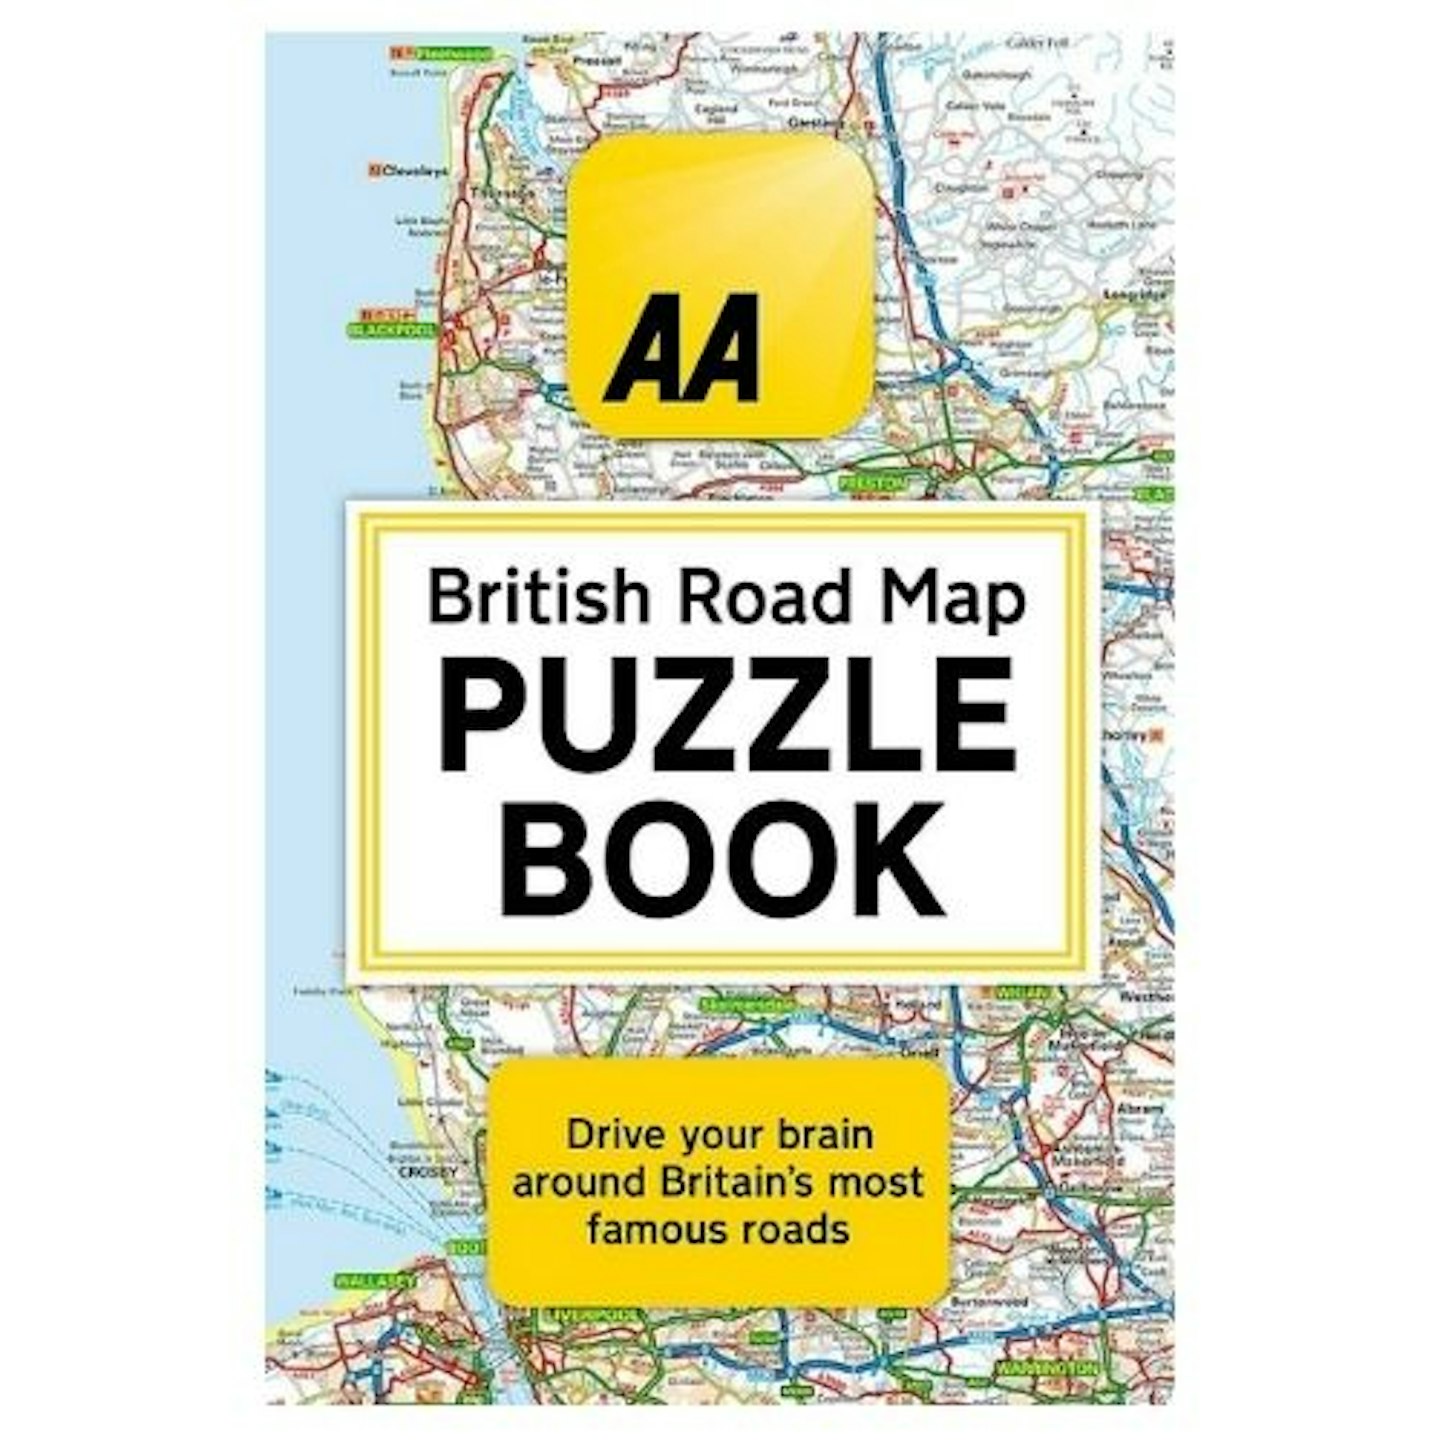 The AA British Road Map Puzzle Book